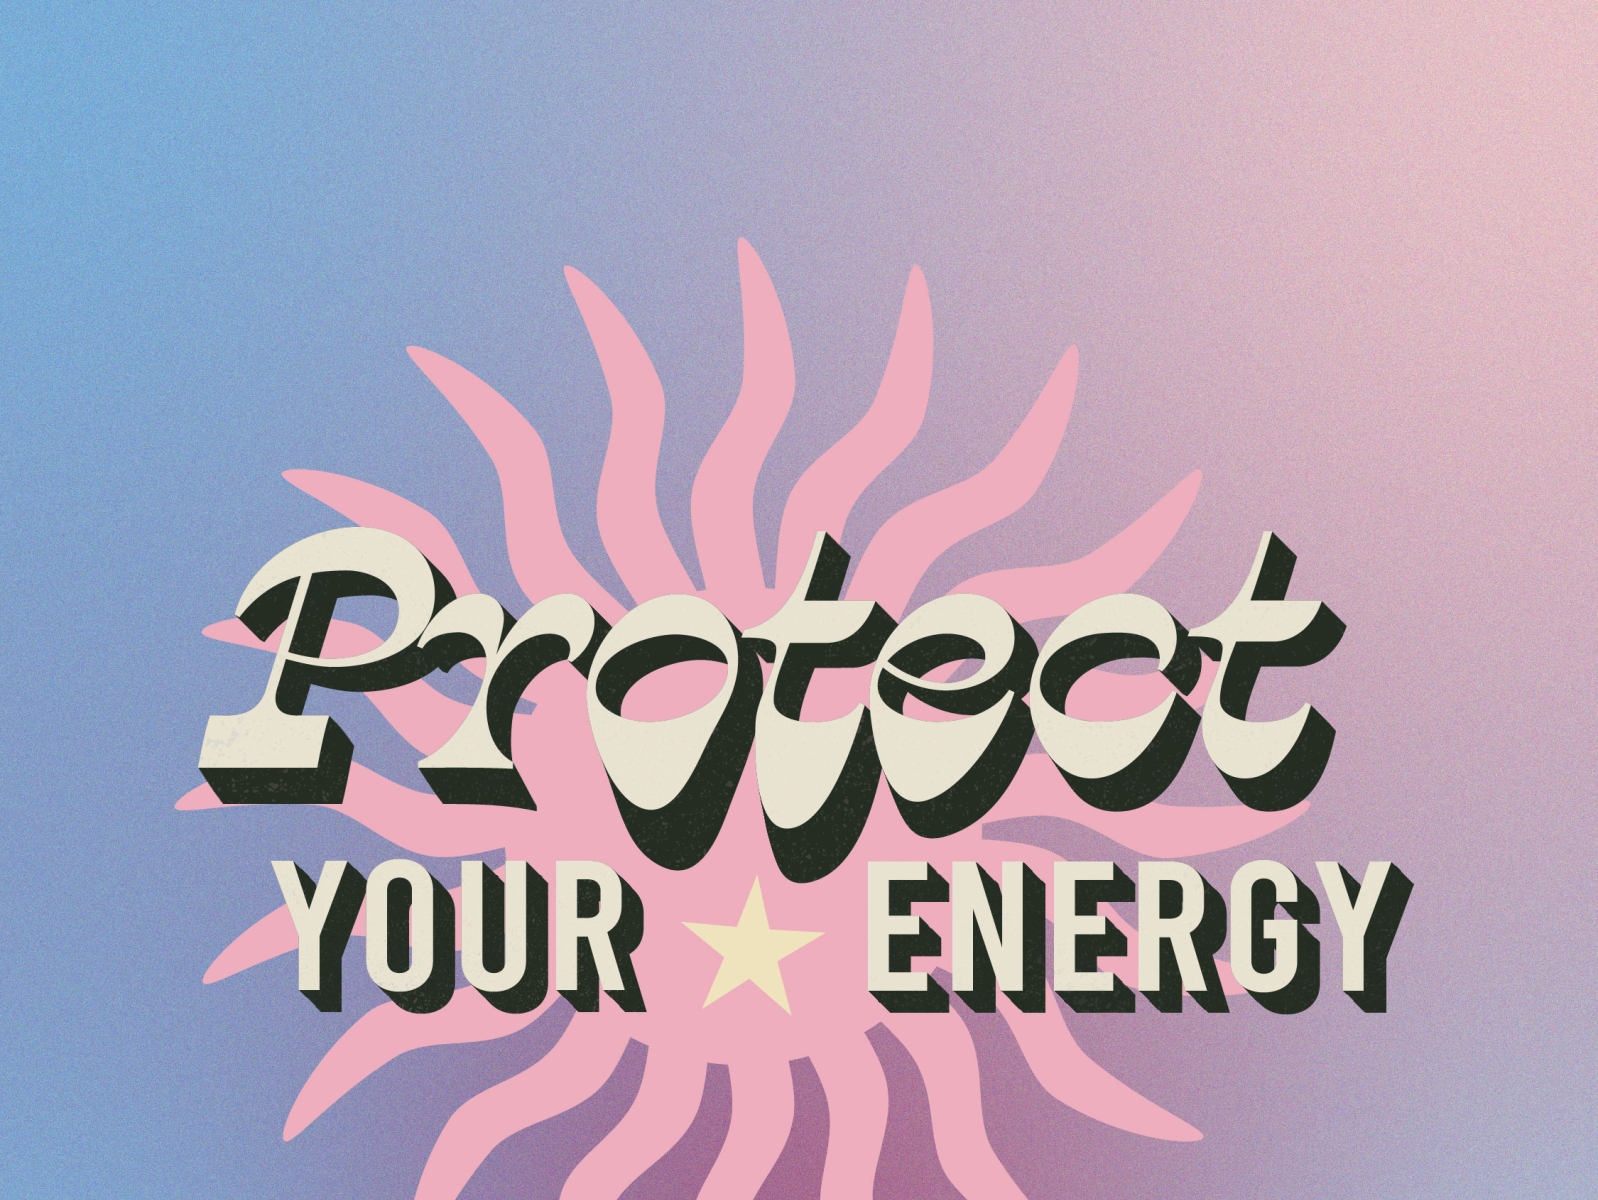 protect your energy by Brenna Murray on Dribbble